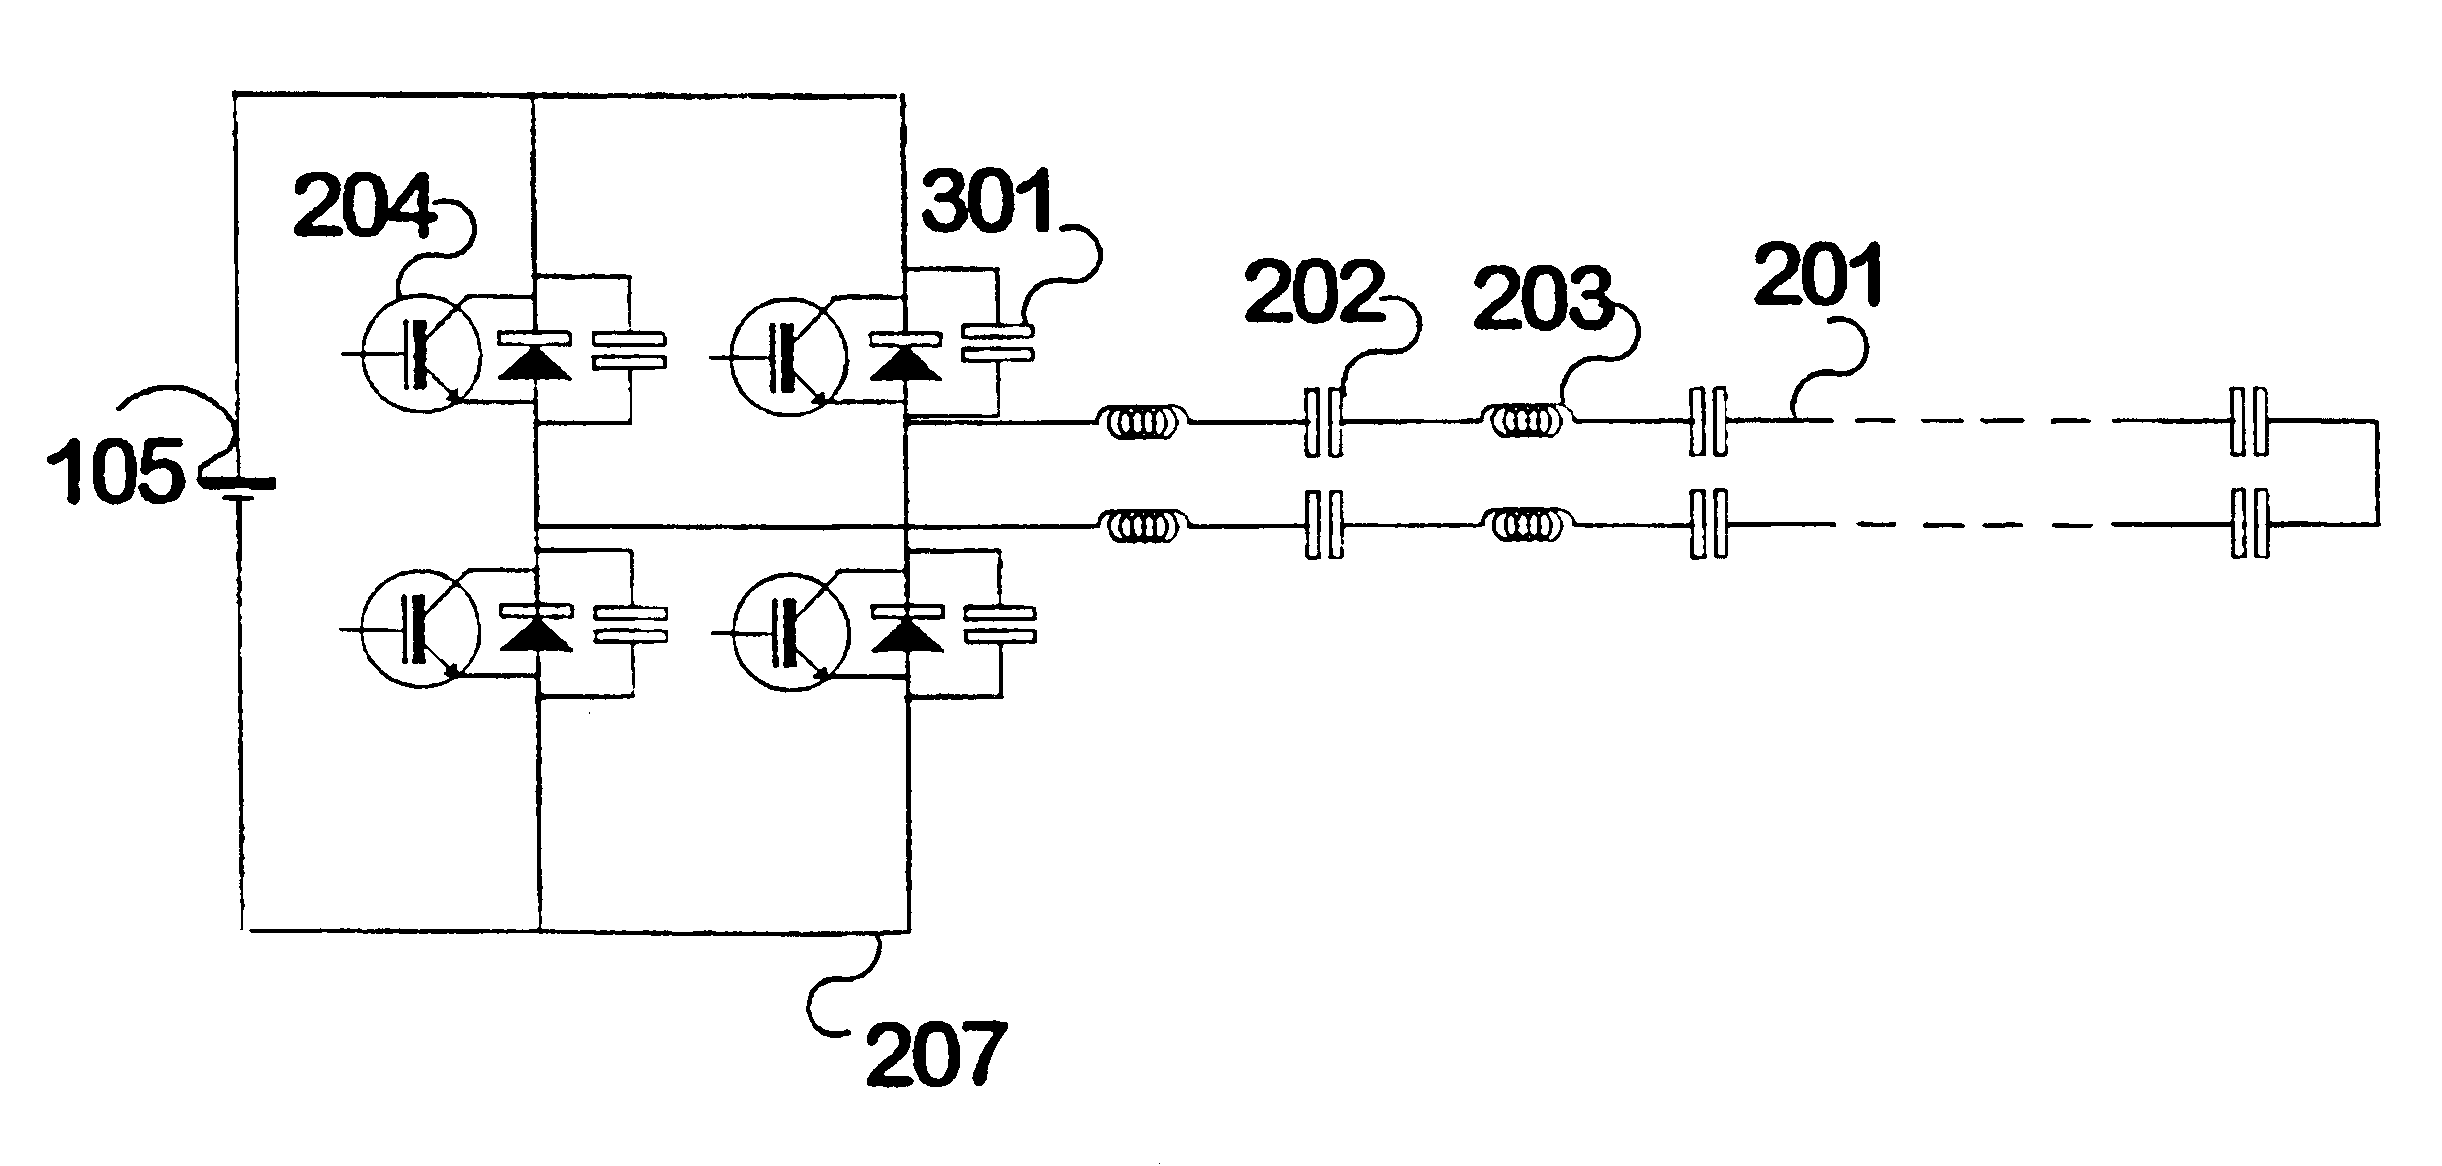 Supply of power to primary conductors